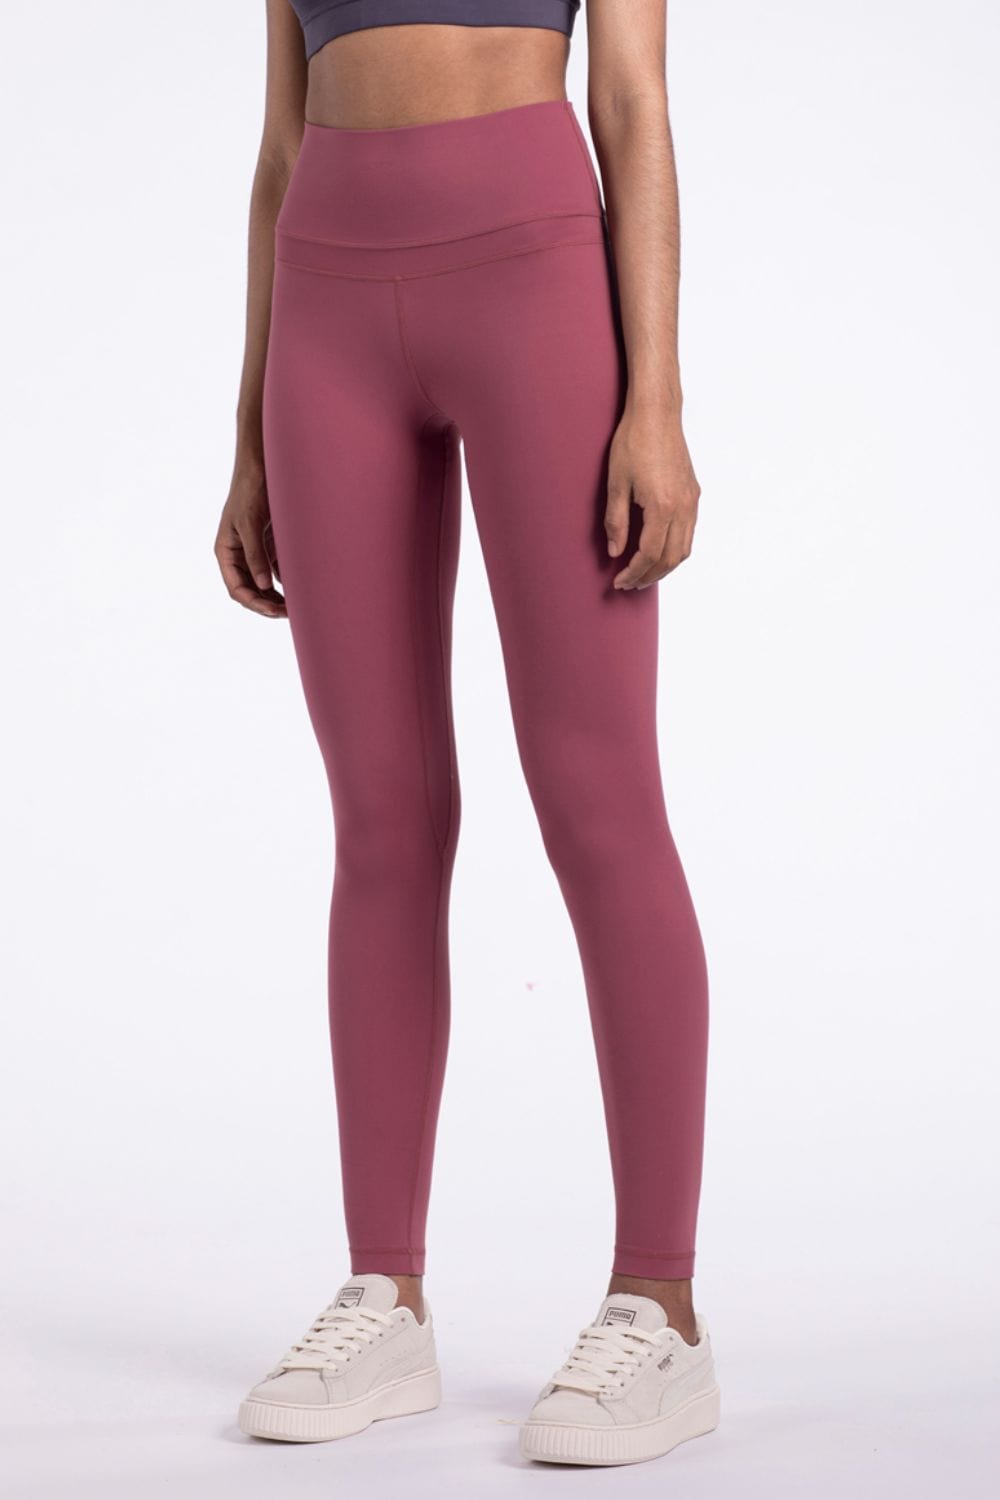 You are Worth The Chase Yoga Leggings - Runway Frenzy 